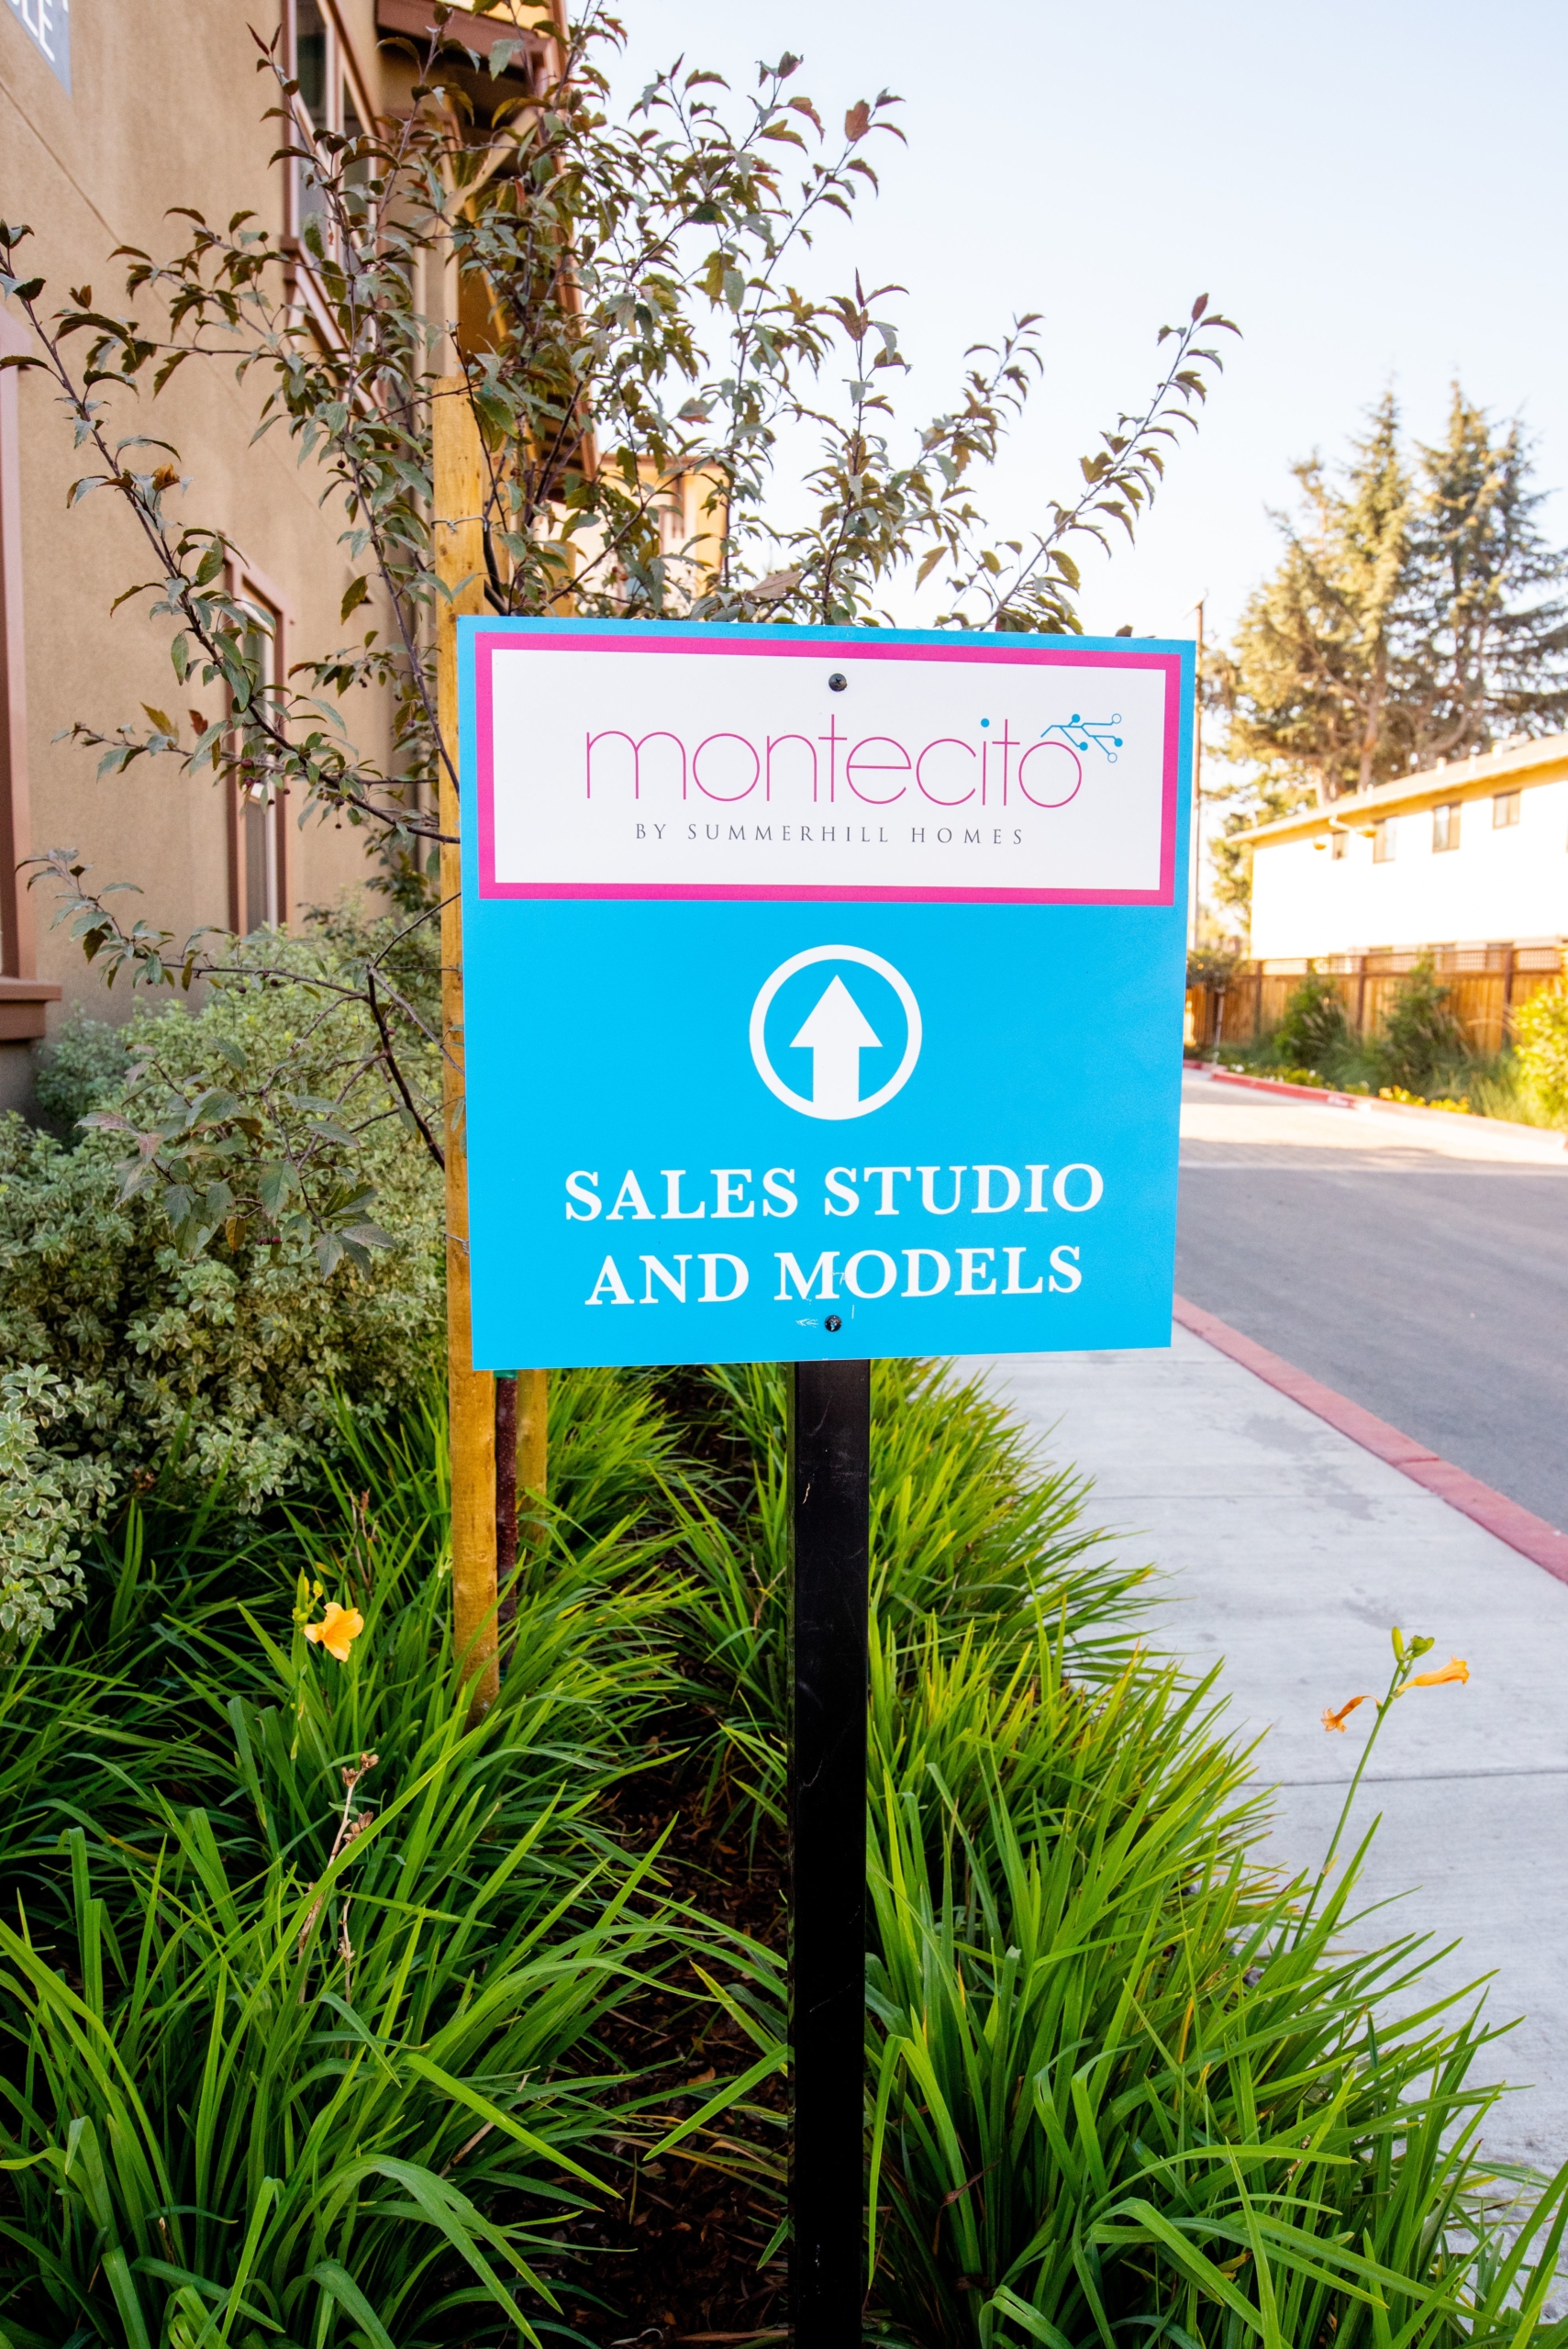 Montecito by Summerhill Homes Signage 4